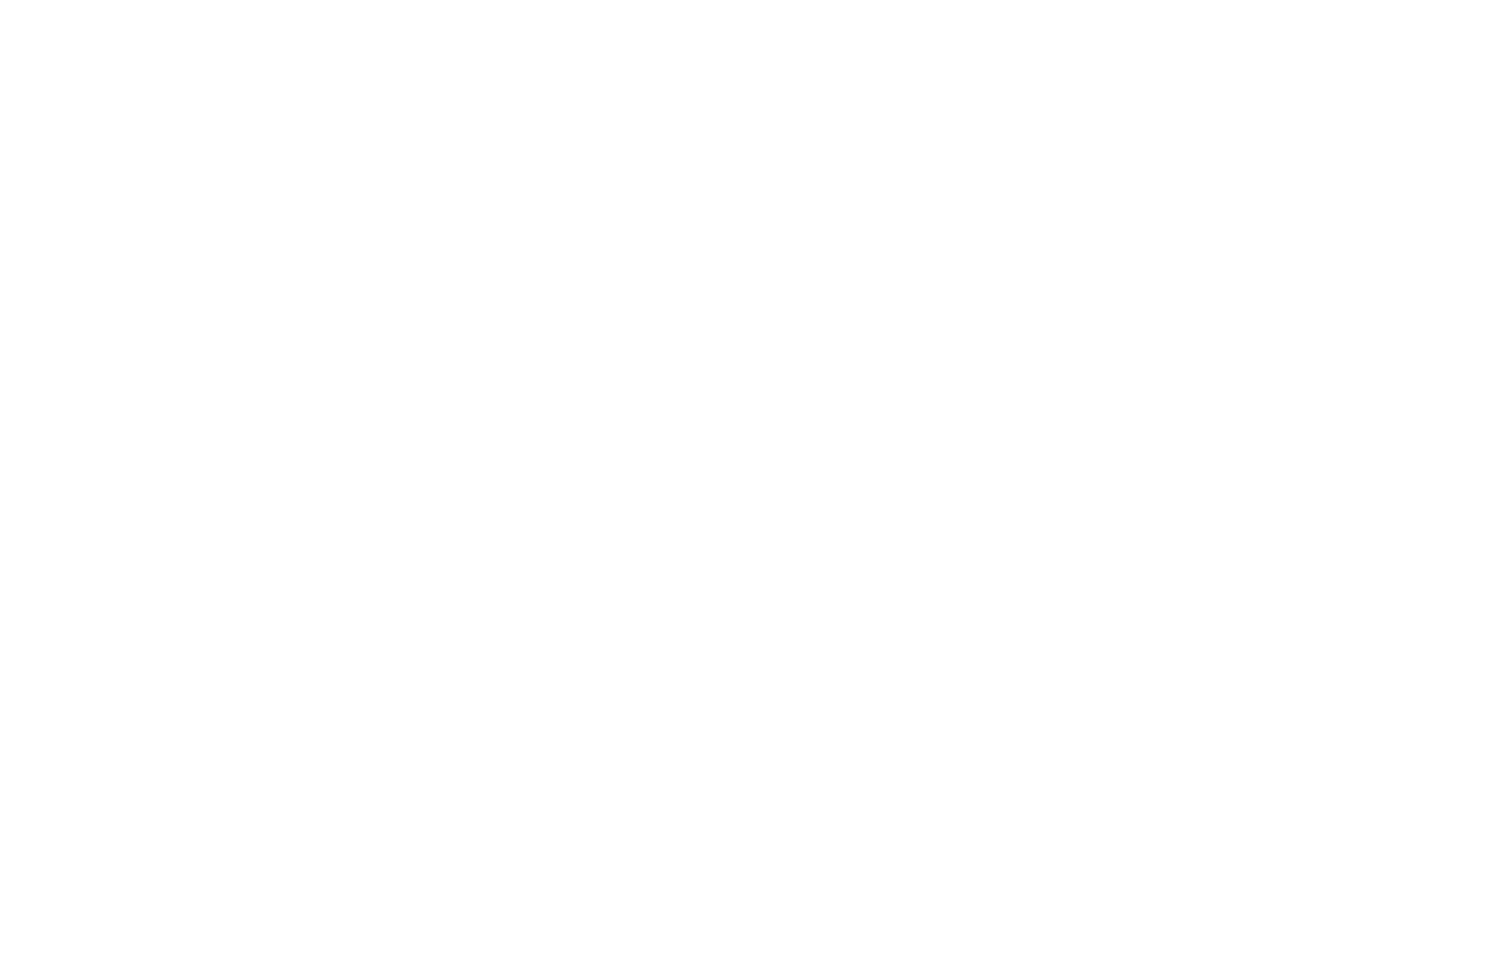 WTM Sports Group